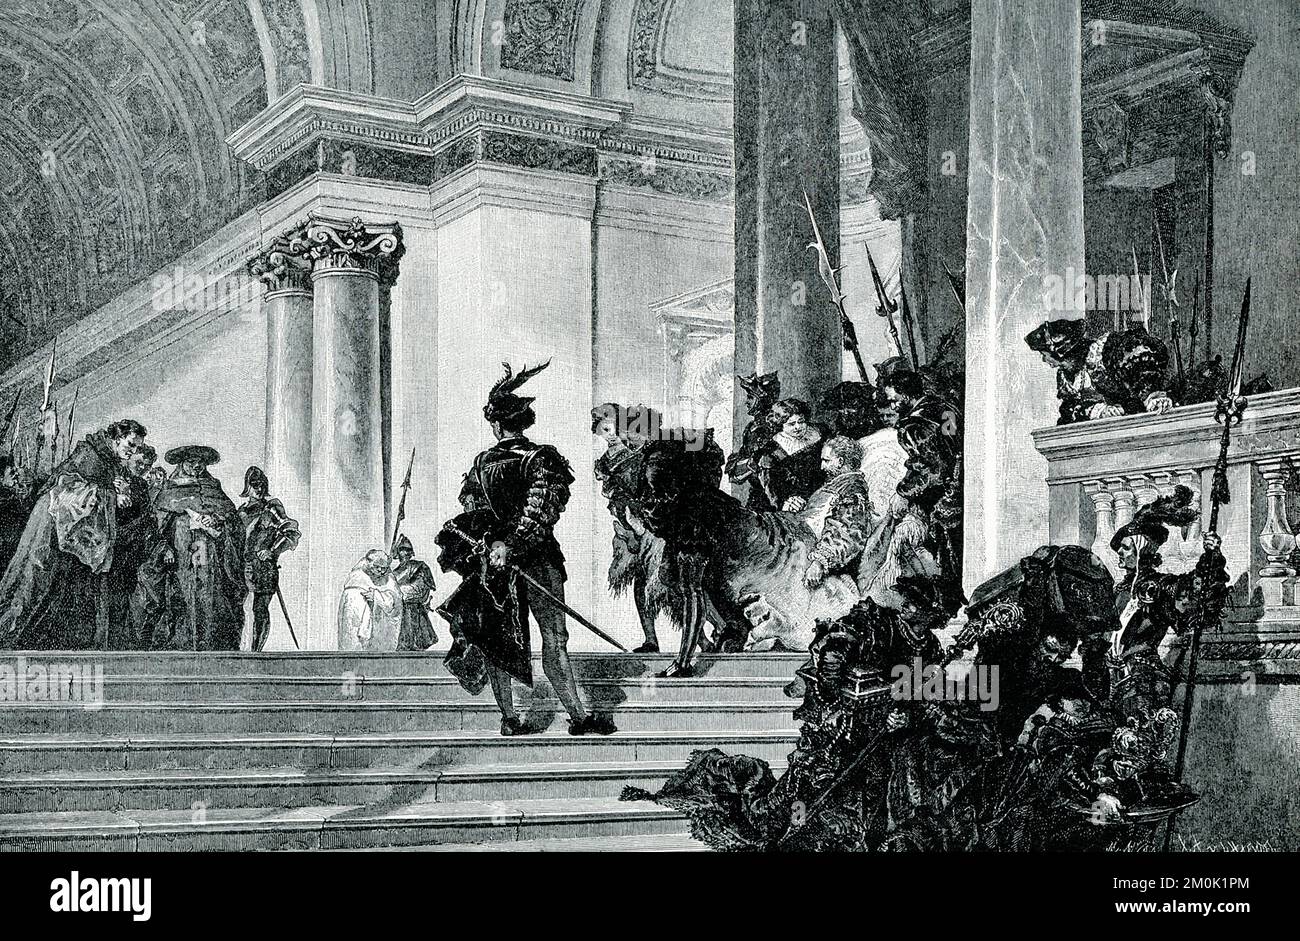 The 1906 caption reads: “We see here the downfall of the subtle and terrible villain Caesar Borgia. He meant to be lord of all Italy, and disposed of all his opponents by secret, slow-working poisons. At last he and his father, Pope Alexander VI, seem to have been trapped into drinking some of the poison they had arranged for another. The father died, and Caesar was long ill  and lost all his power. A new Pope, backed by armed retainers, came to the palace with many apologies, and turned out the helpless invalid and his followers. The two bands of soldiers are passing each other like so many t Stock Photo